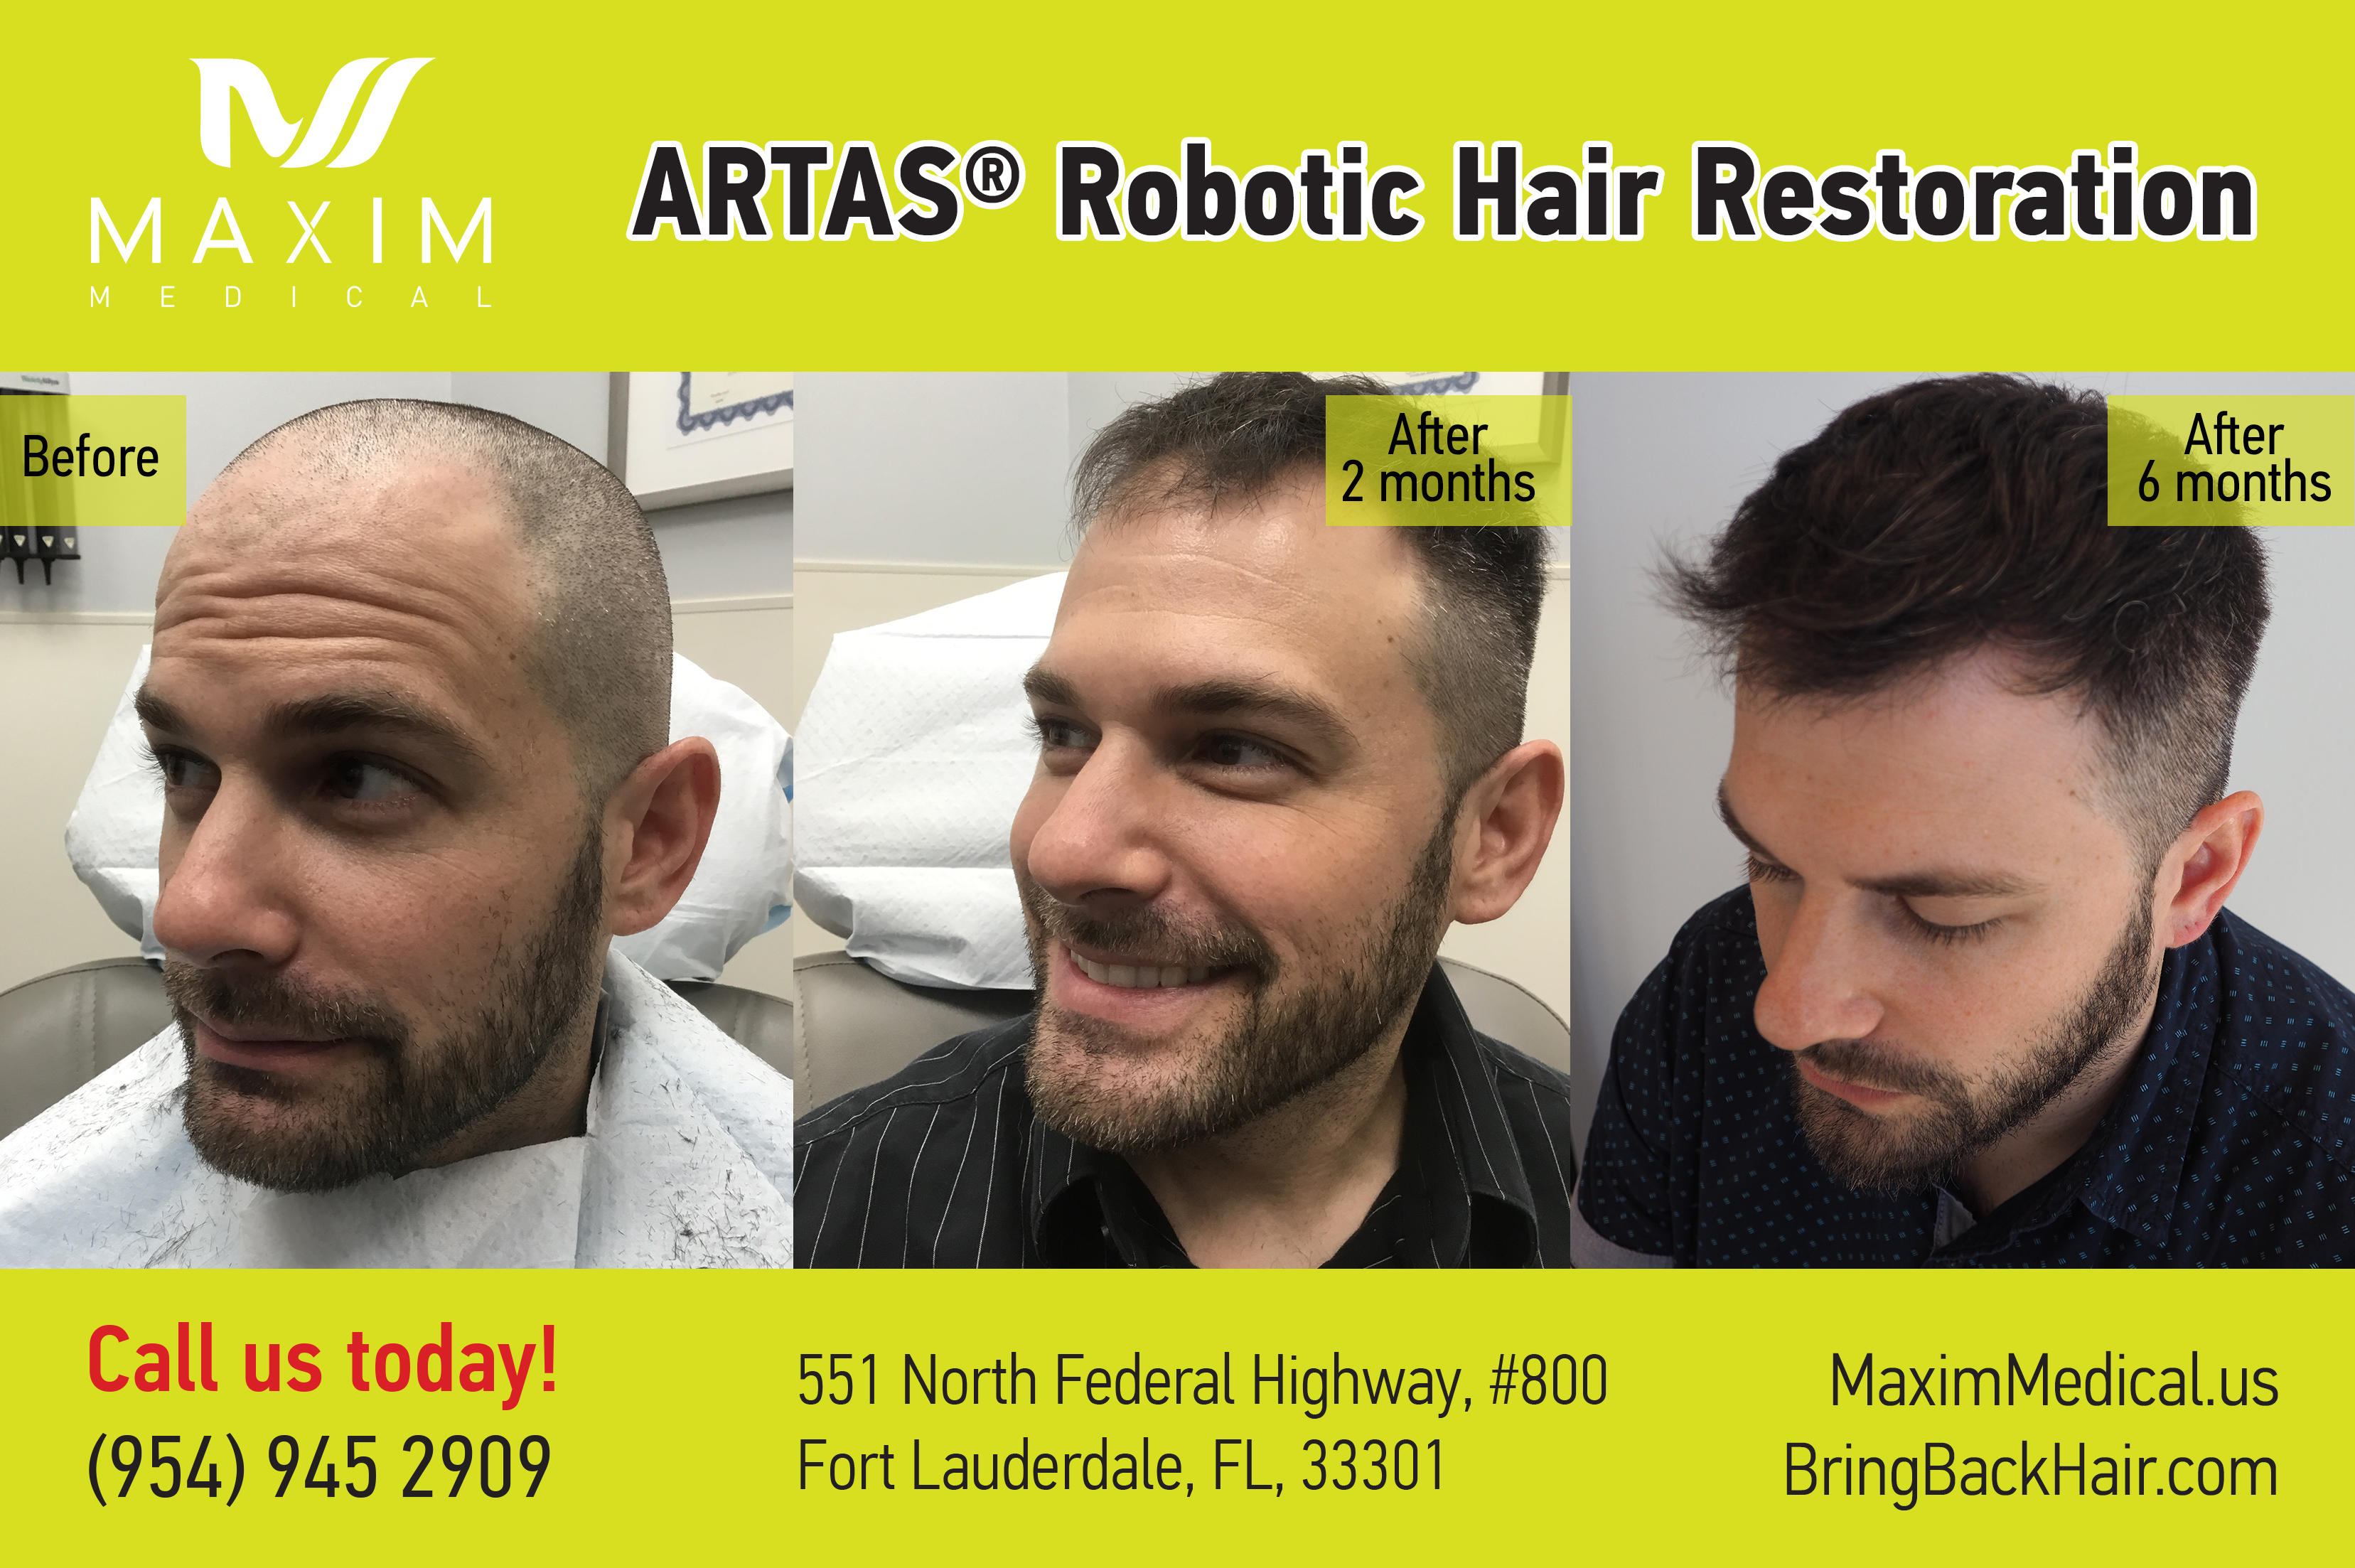 Before&After ARTAS robotic hair transplant surgery. 
Real people - real results!